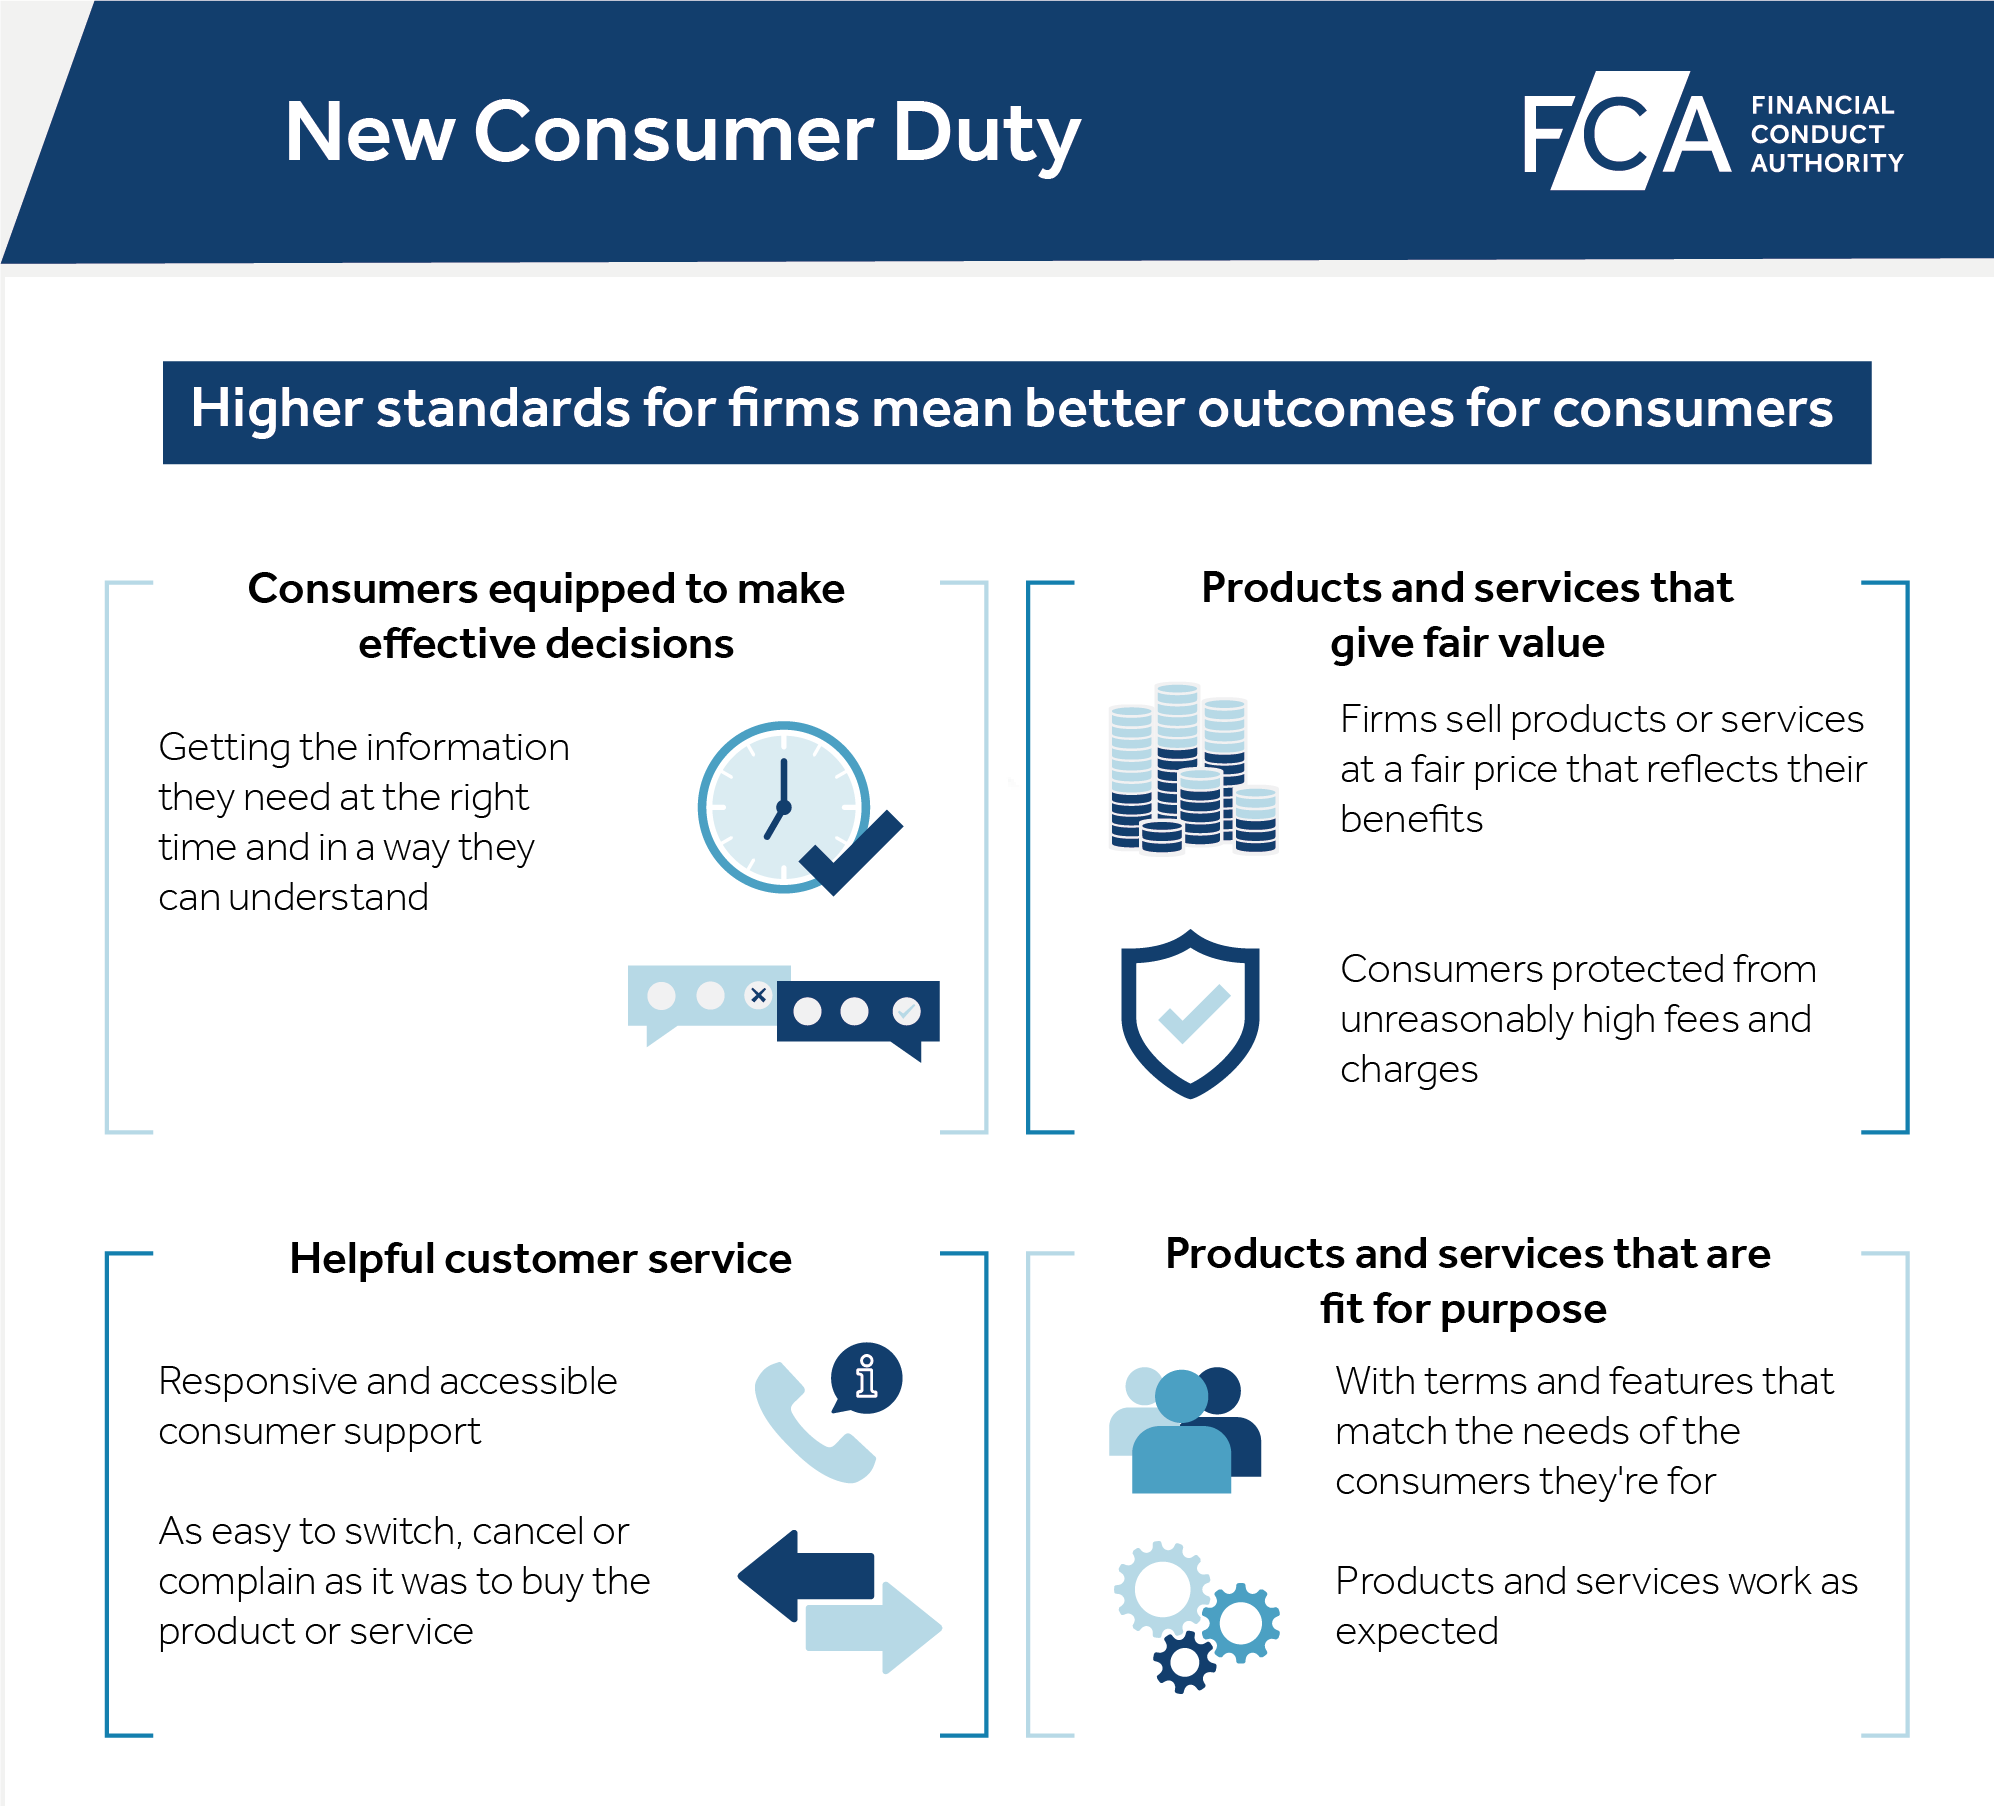 Payments firms must act now on FCA’s new consumer duty rules The Payments Association